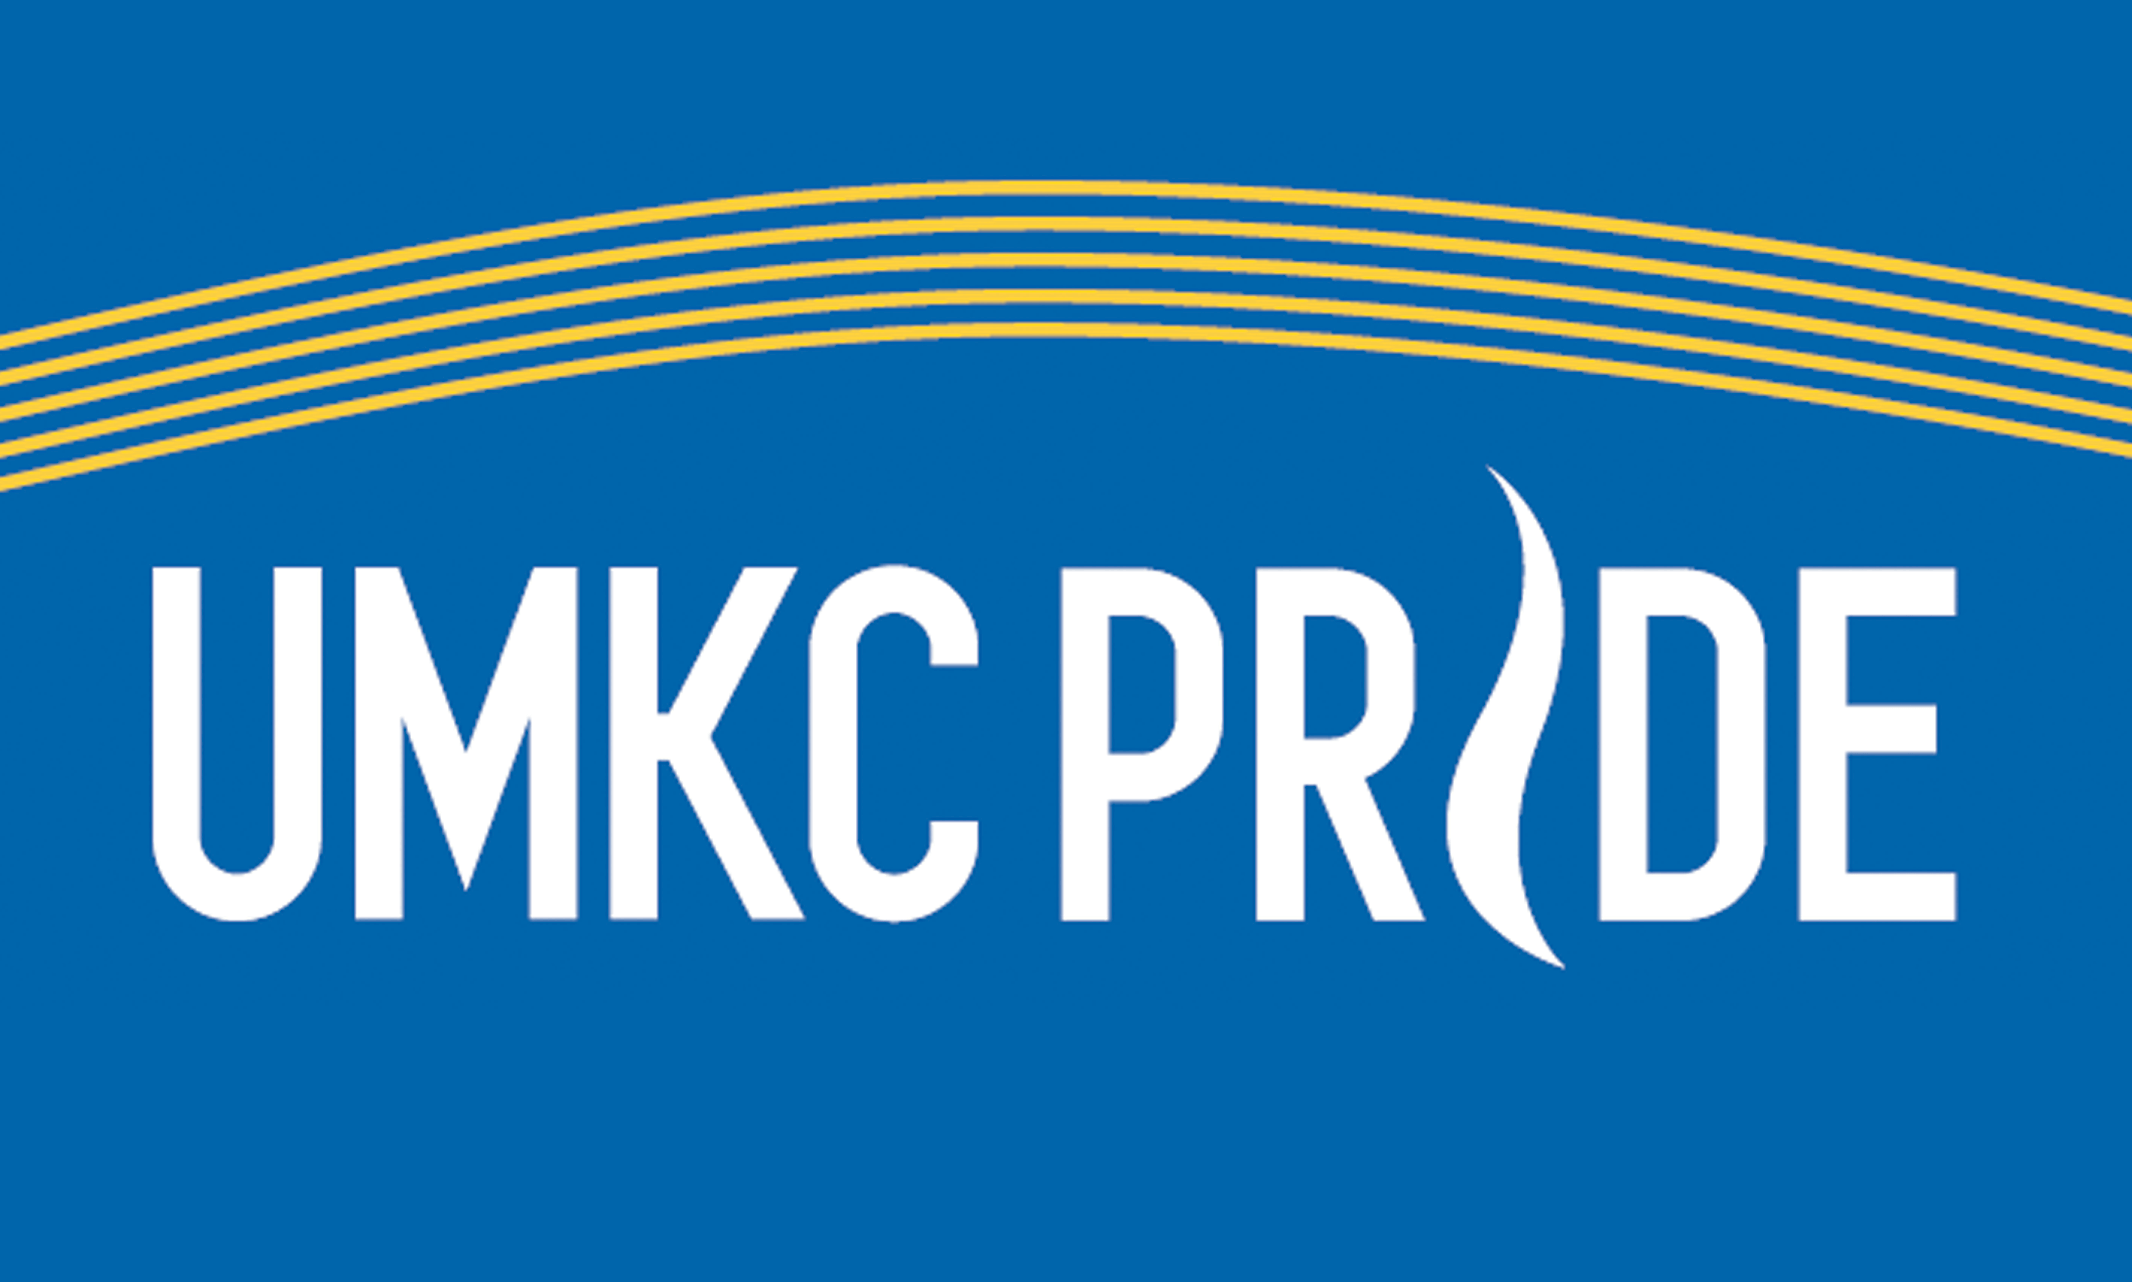 Blue background with curved yellow lines above "UMKC Pride"